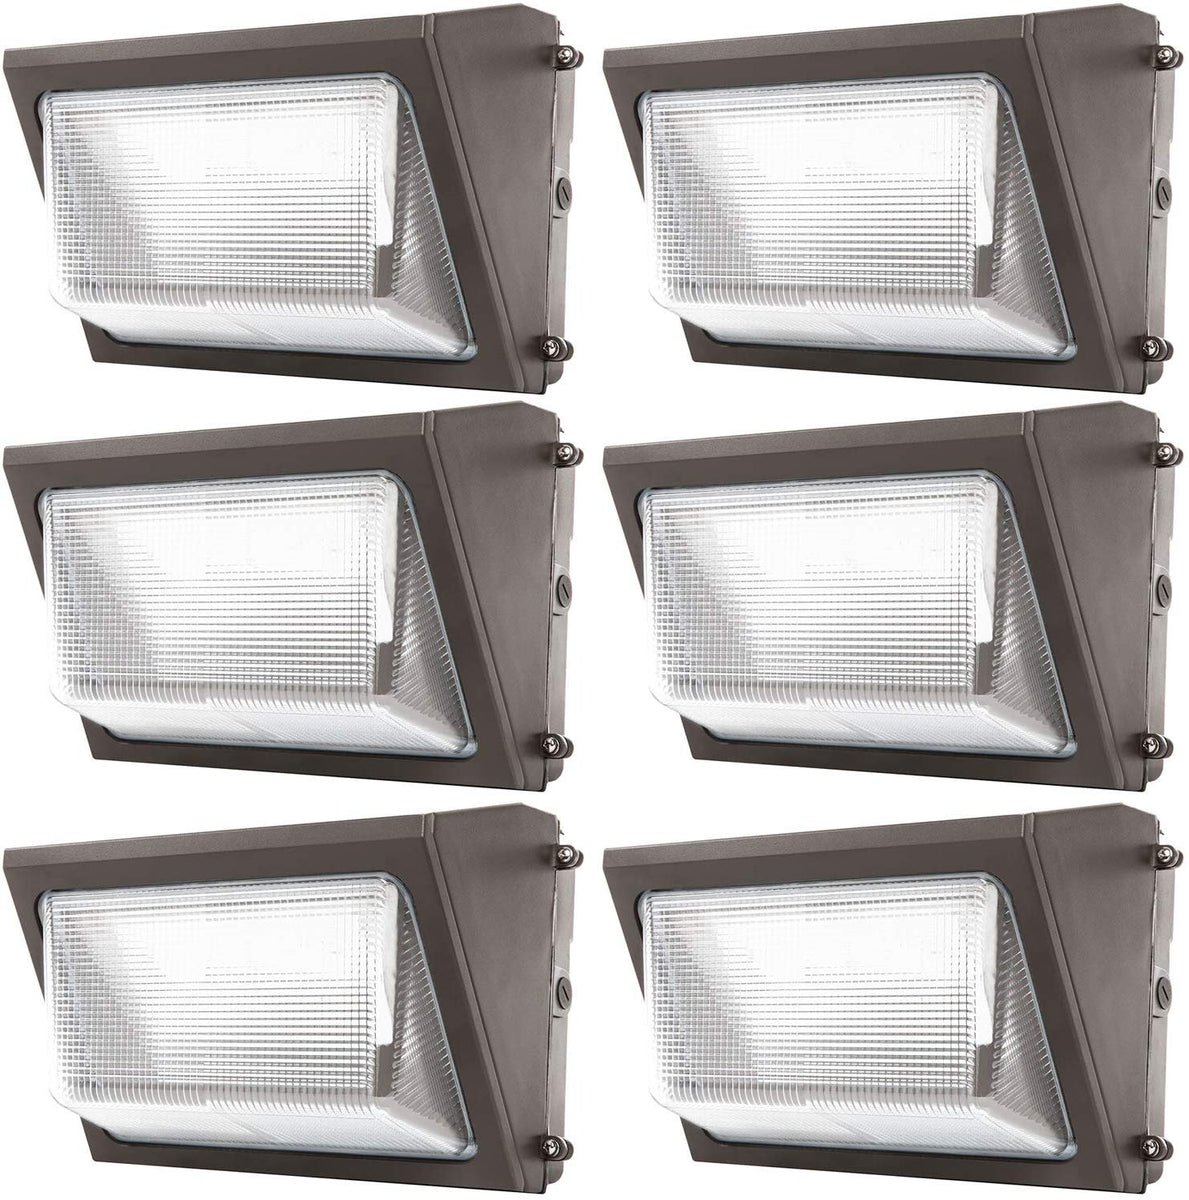 Sunco Lighting Pack 80W LED Wall Pack, Daylight 5000K, 7600 LM, HID –  Pete's Patio, Lawn  Garden